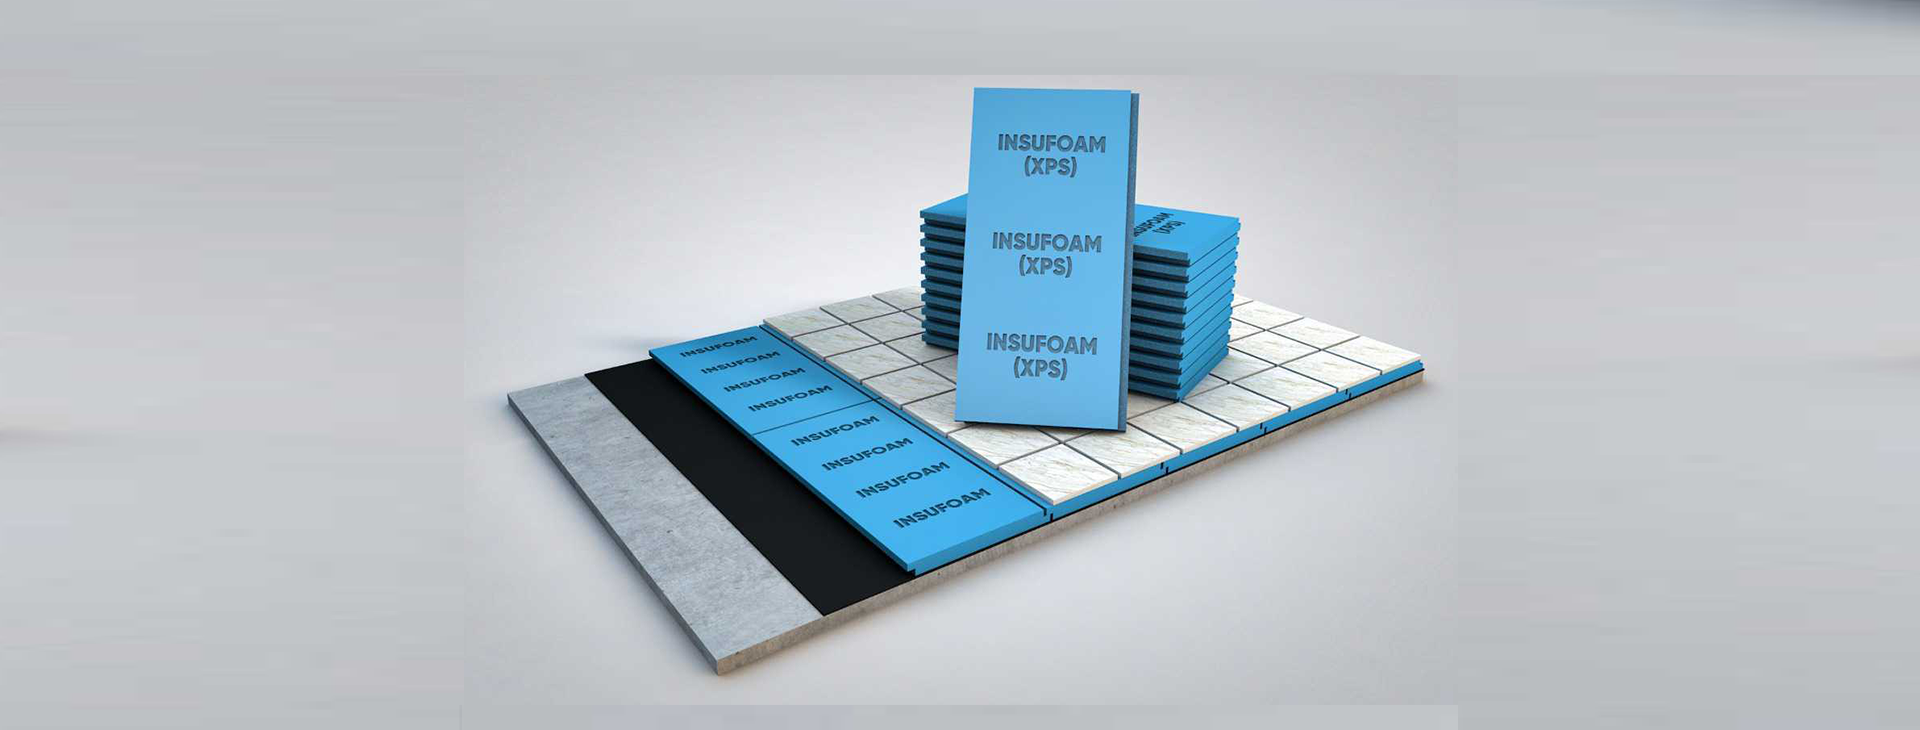 XPS Foam for roof insulation